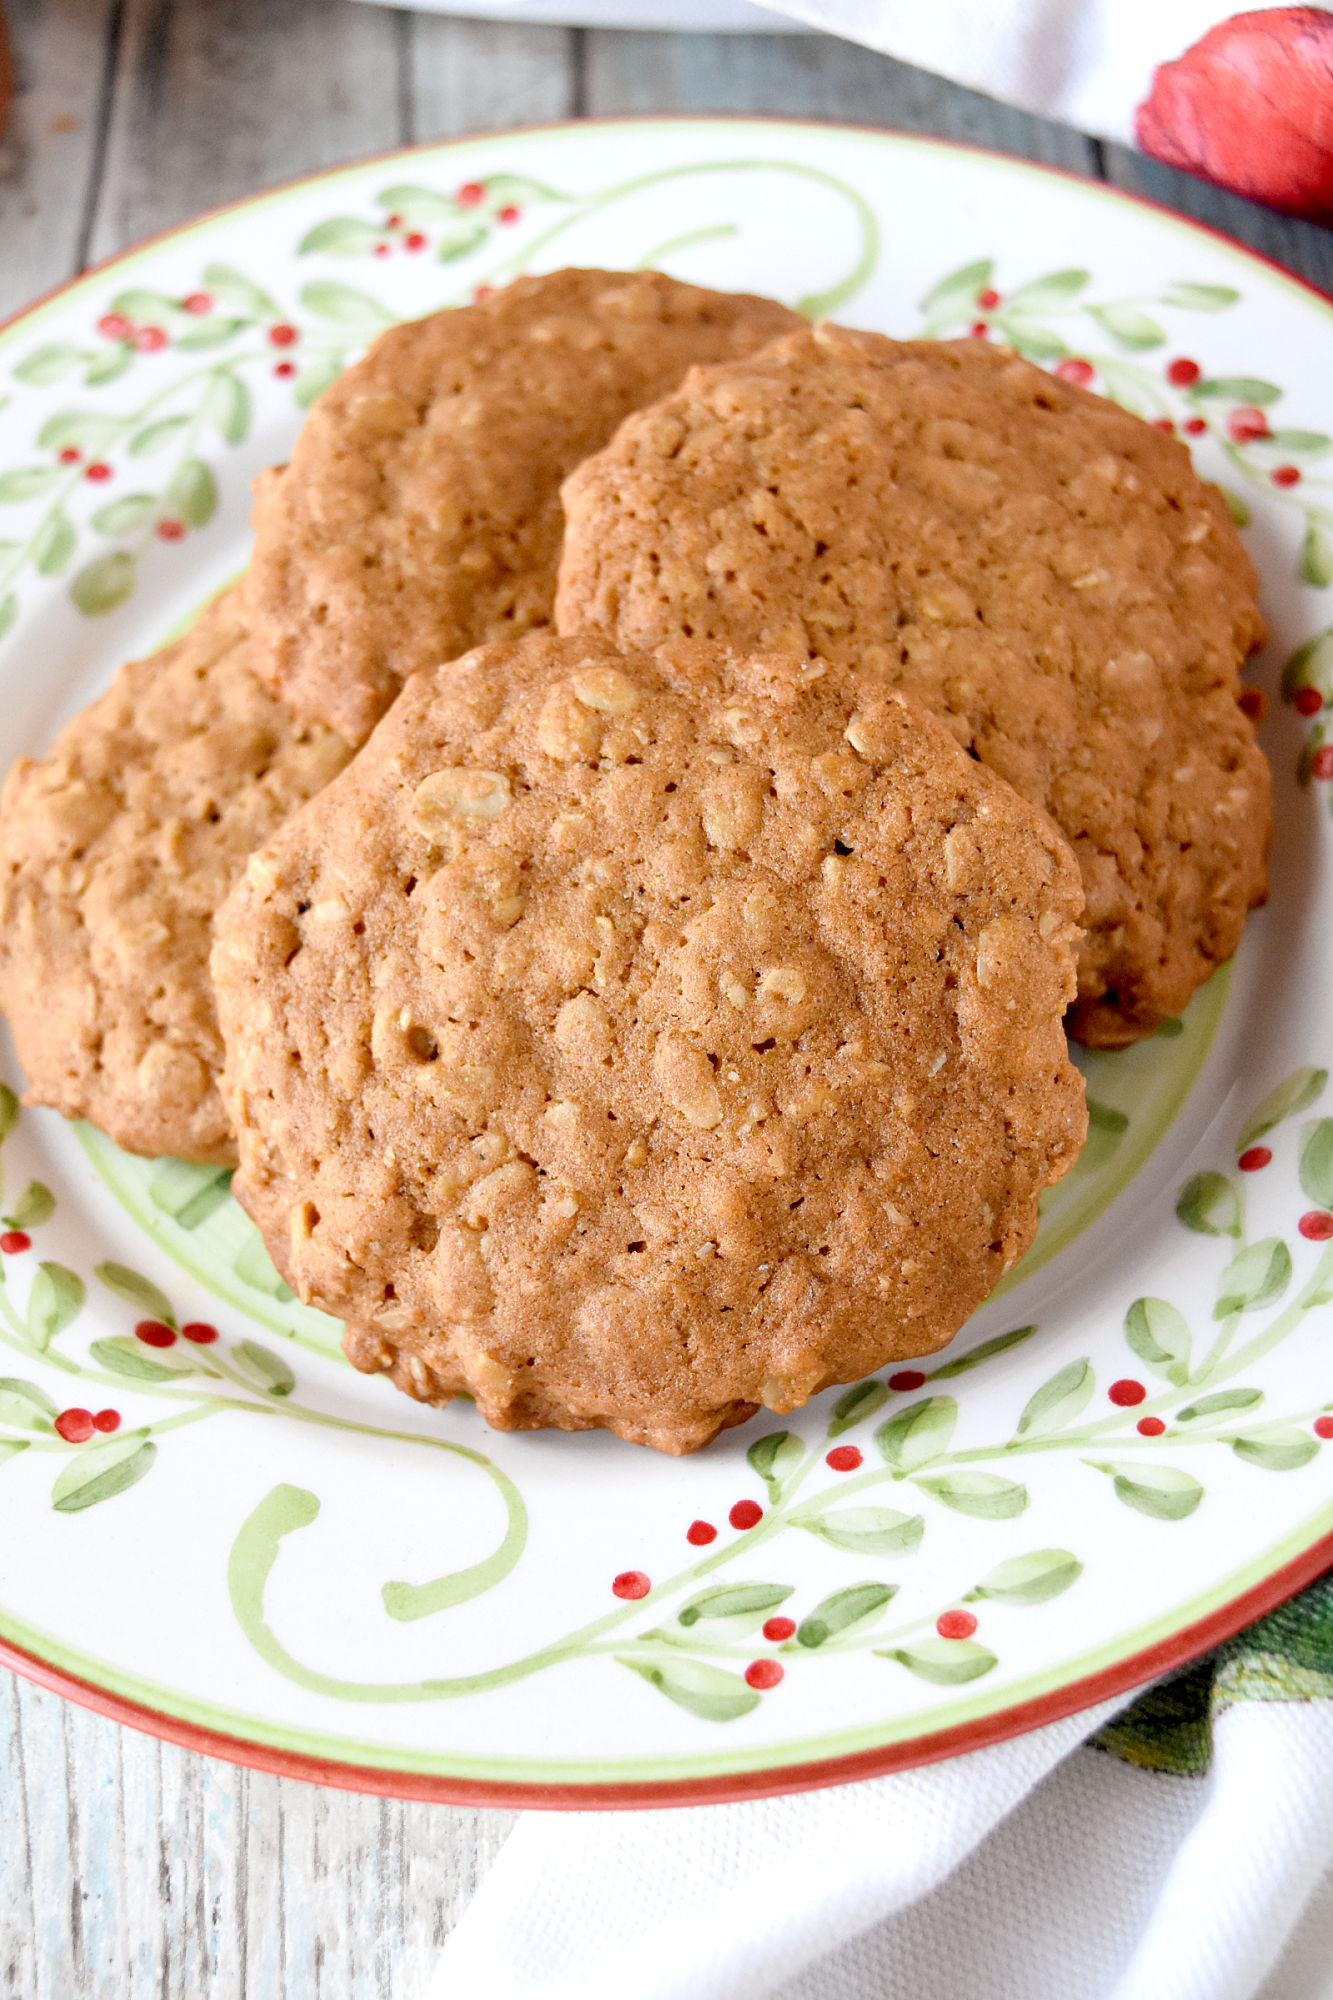 Gingerbread Oatmeal Cookies a combination of two of my favorite cookies! Gingerbread and oatmeal! Made with homemade gingerbread spice, they’re packed with seasonal spices and delicious oats. #ChristmasCookies #gingerbreadspice #gingerbreadcookies #oatmealcookies #homemadespices